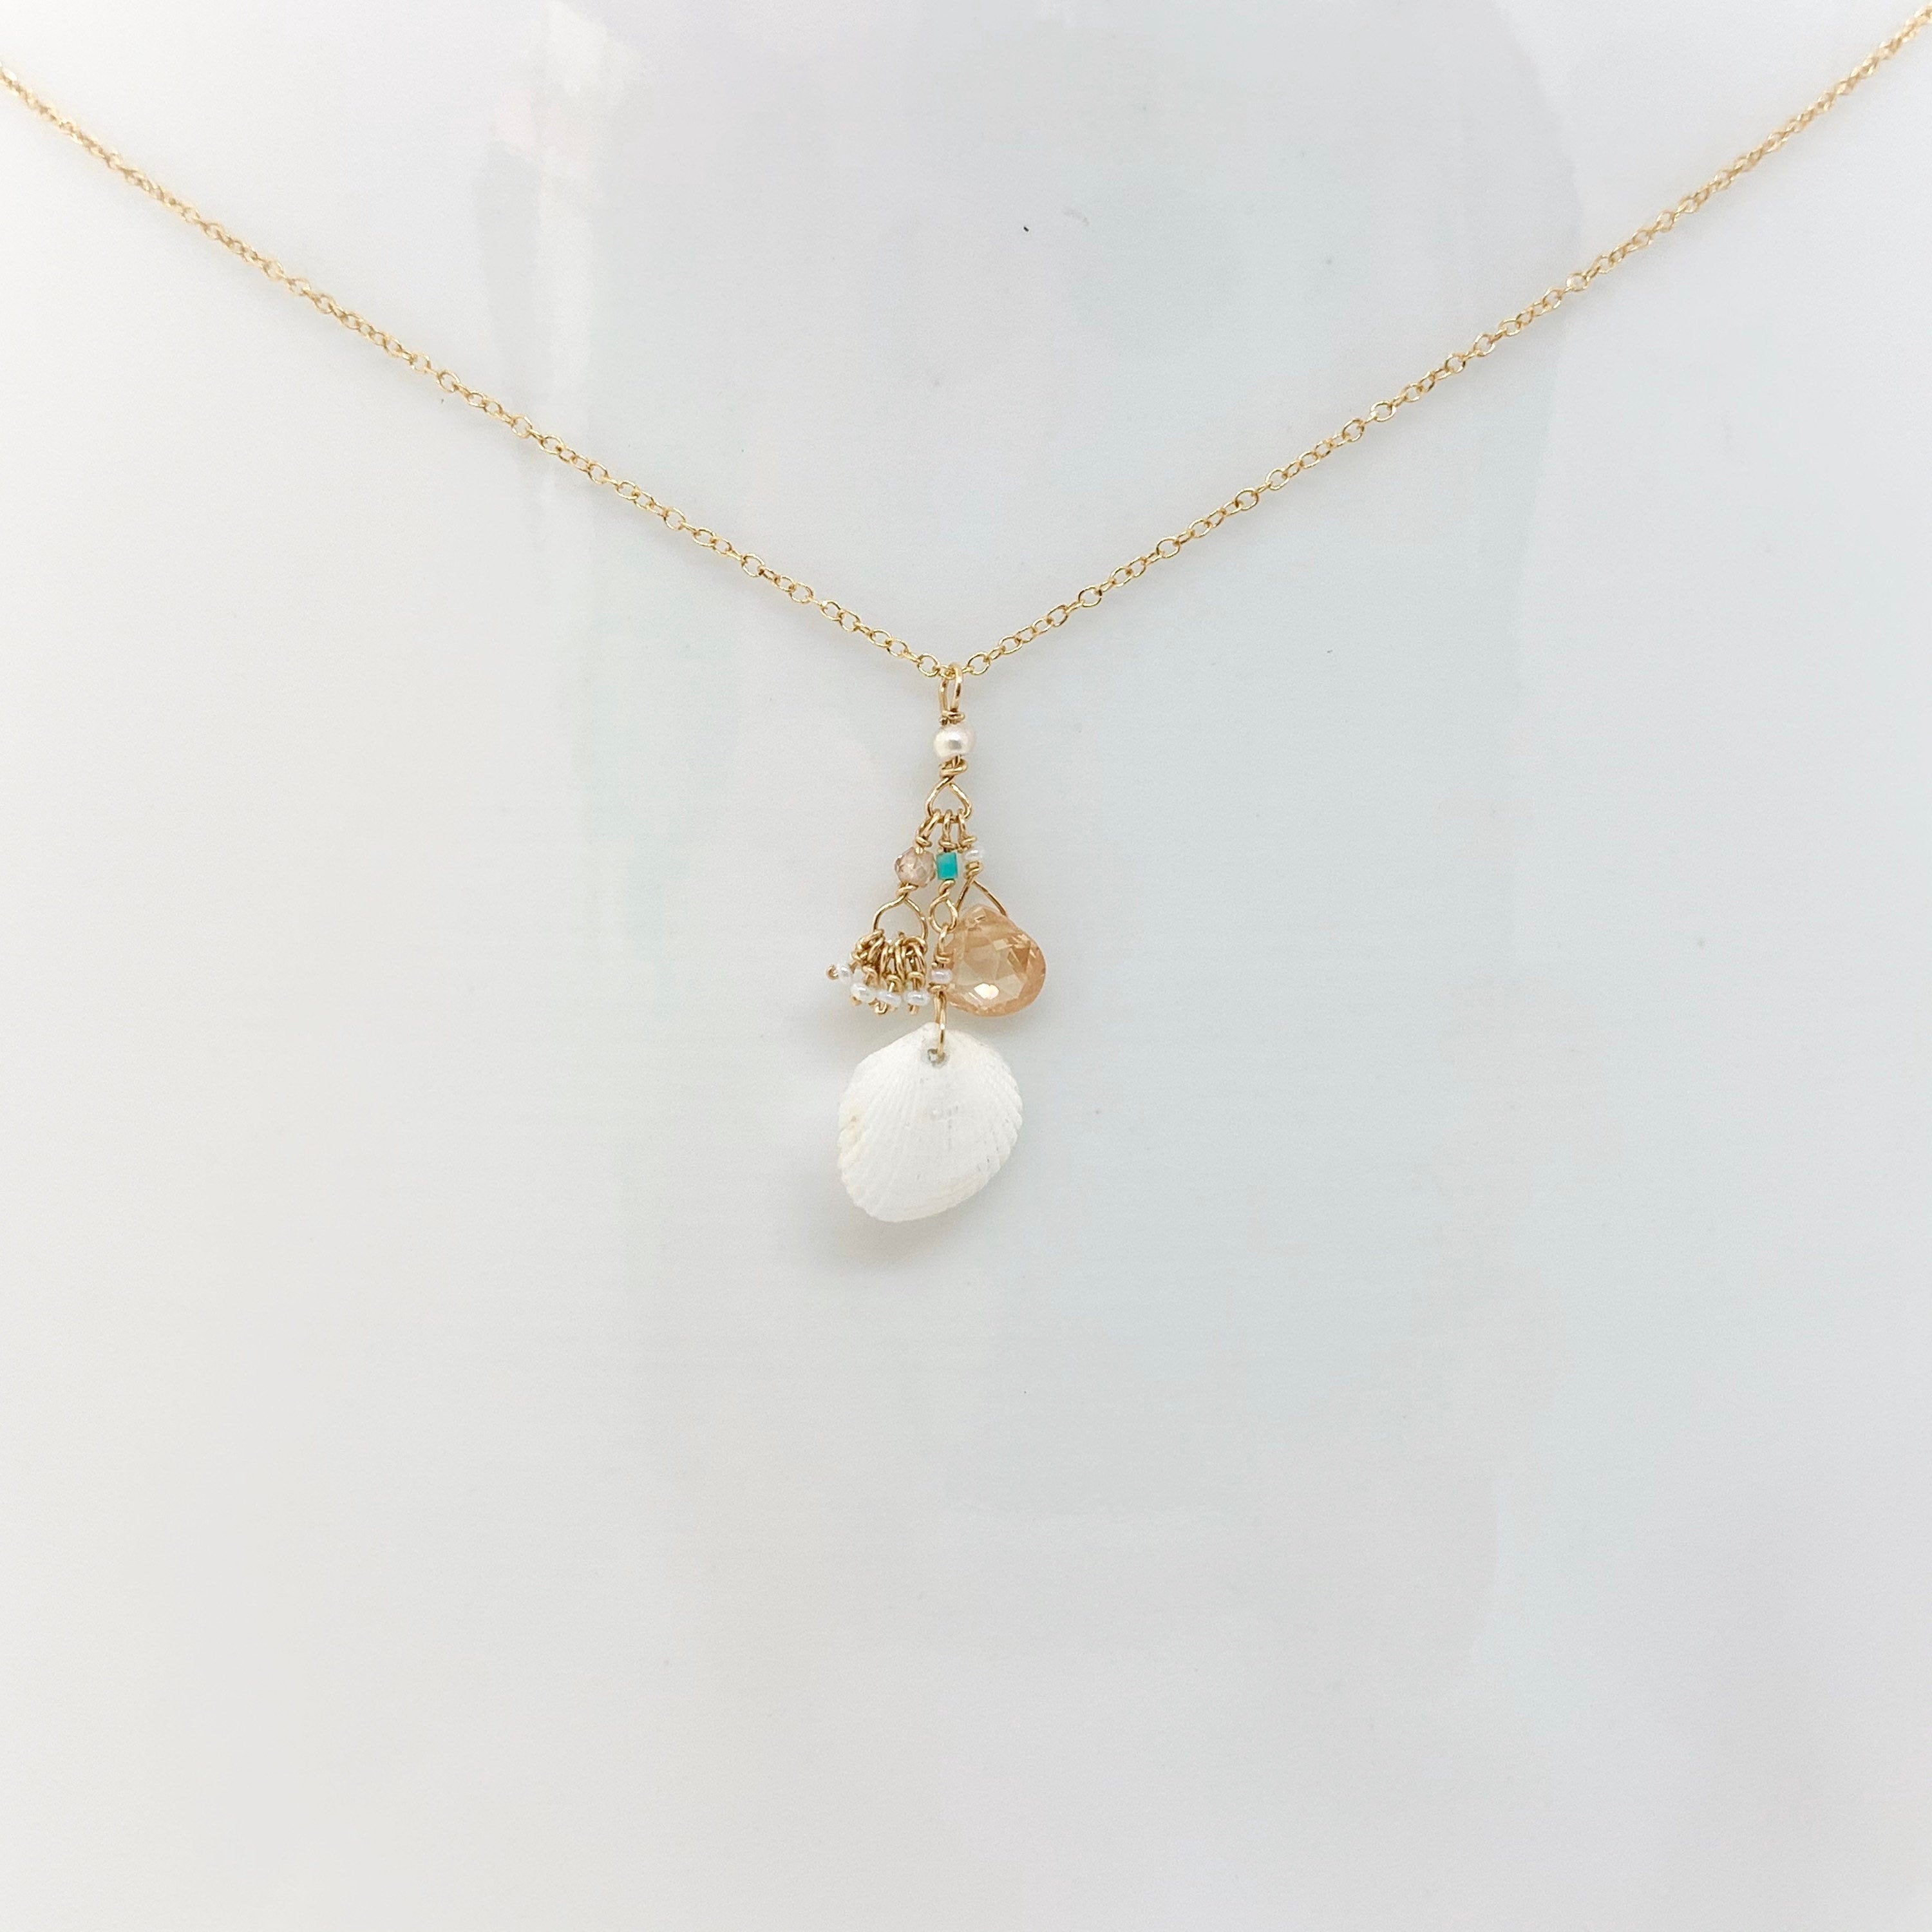 14k Gold Chain Necklace w/ Seashell, Cubic Zirconia, Quartz, Turquoise, Freshwater Pearl & Antique Italian Beads